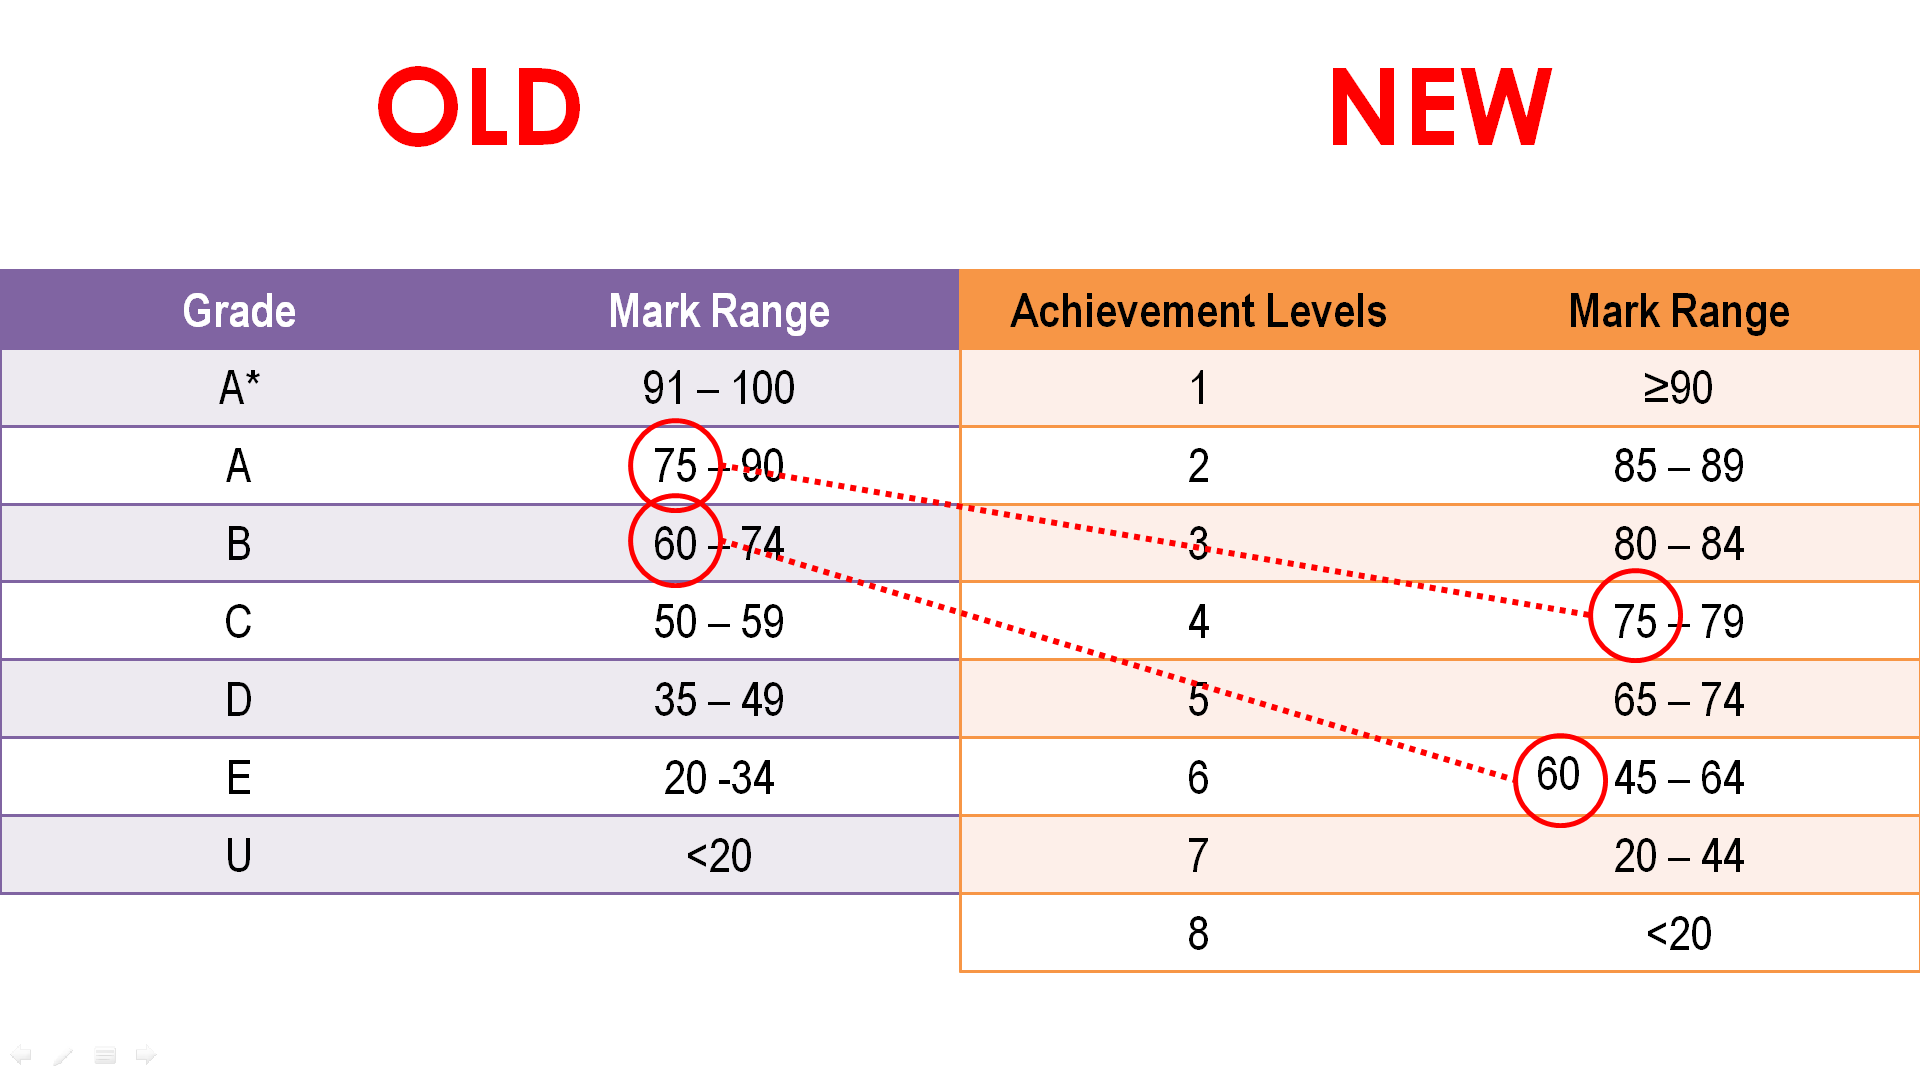 New Psle Education Scoring System Does It Change Anything The Heart Truths